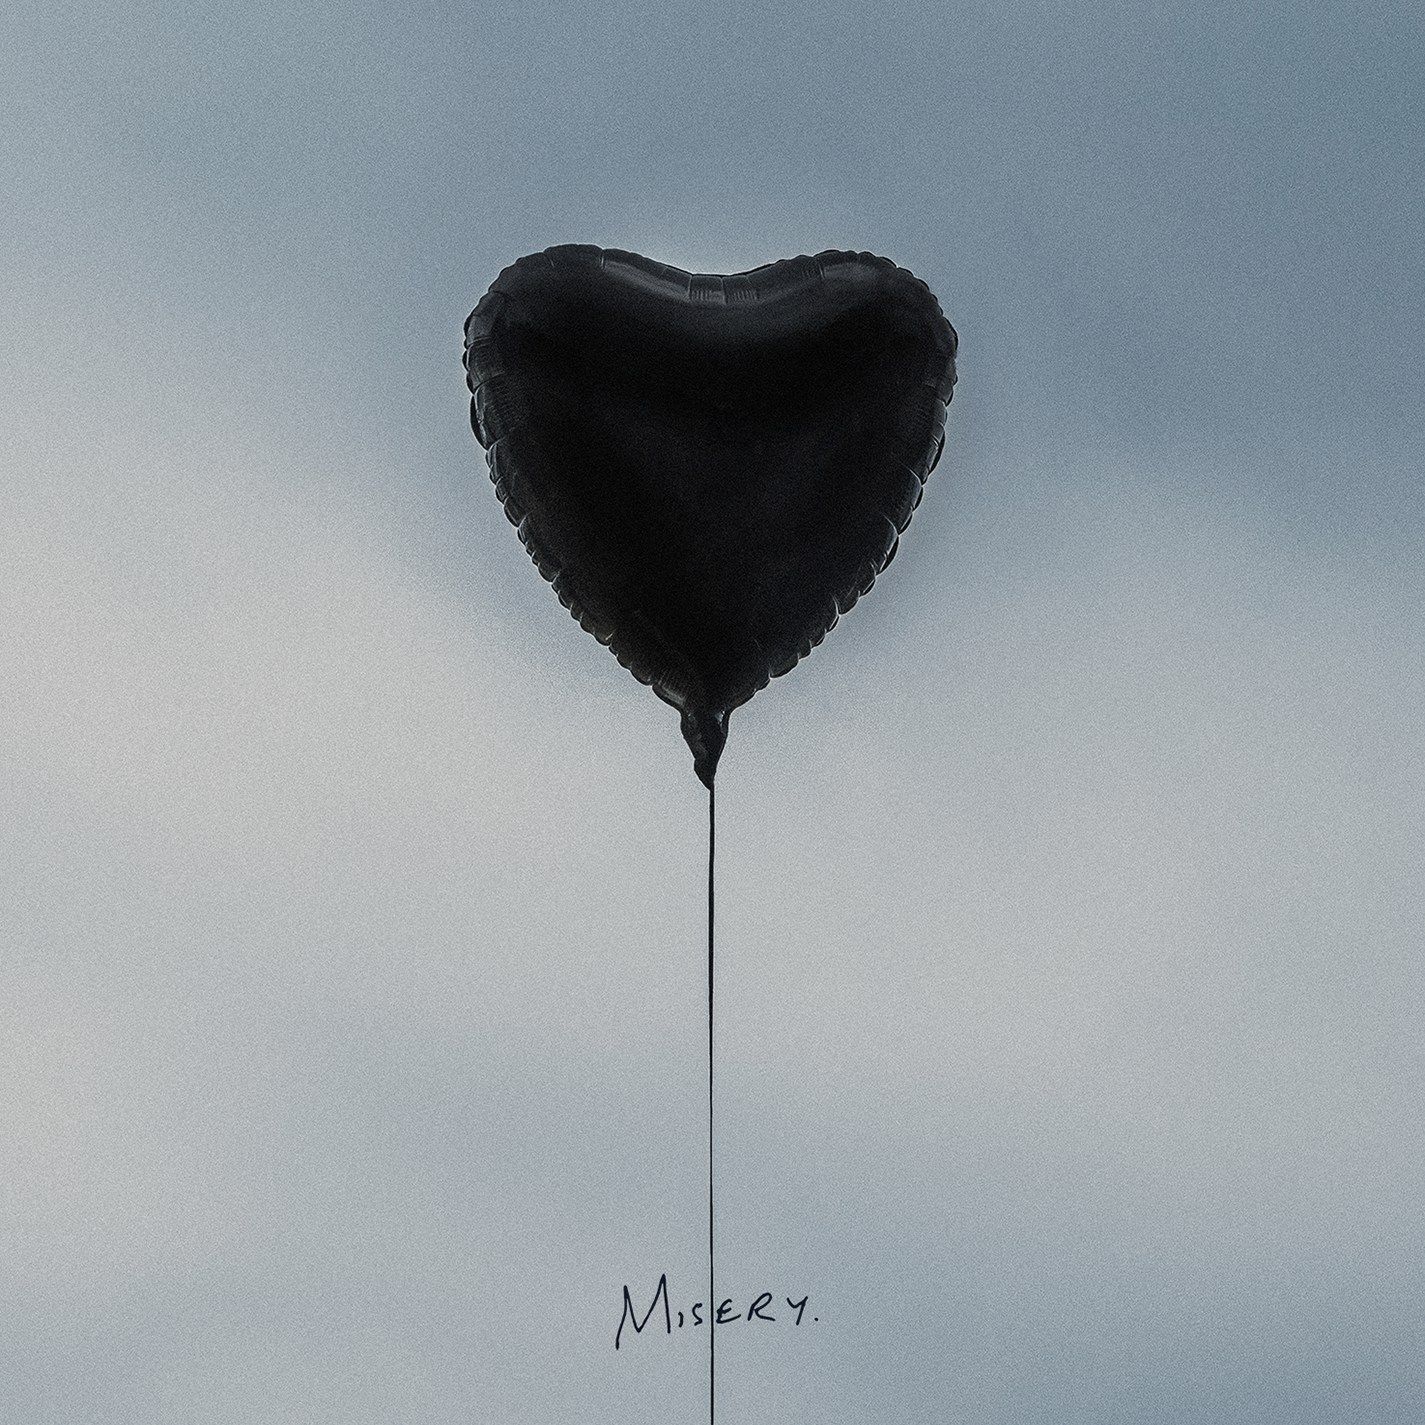 Finding Love in 'Misery': A Review of The Amity Affliction's